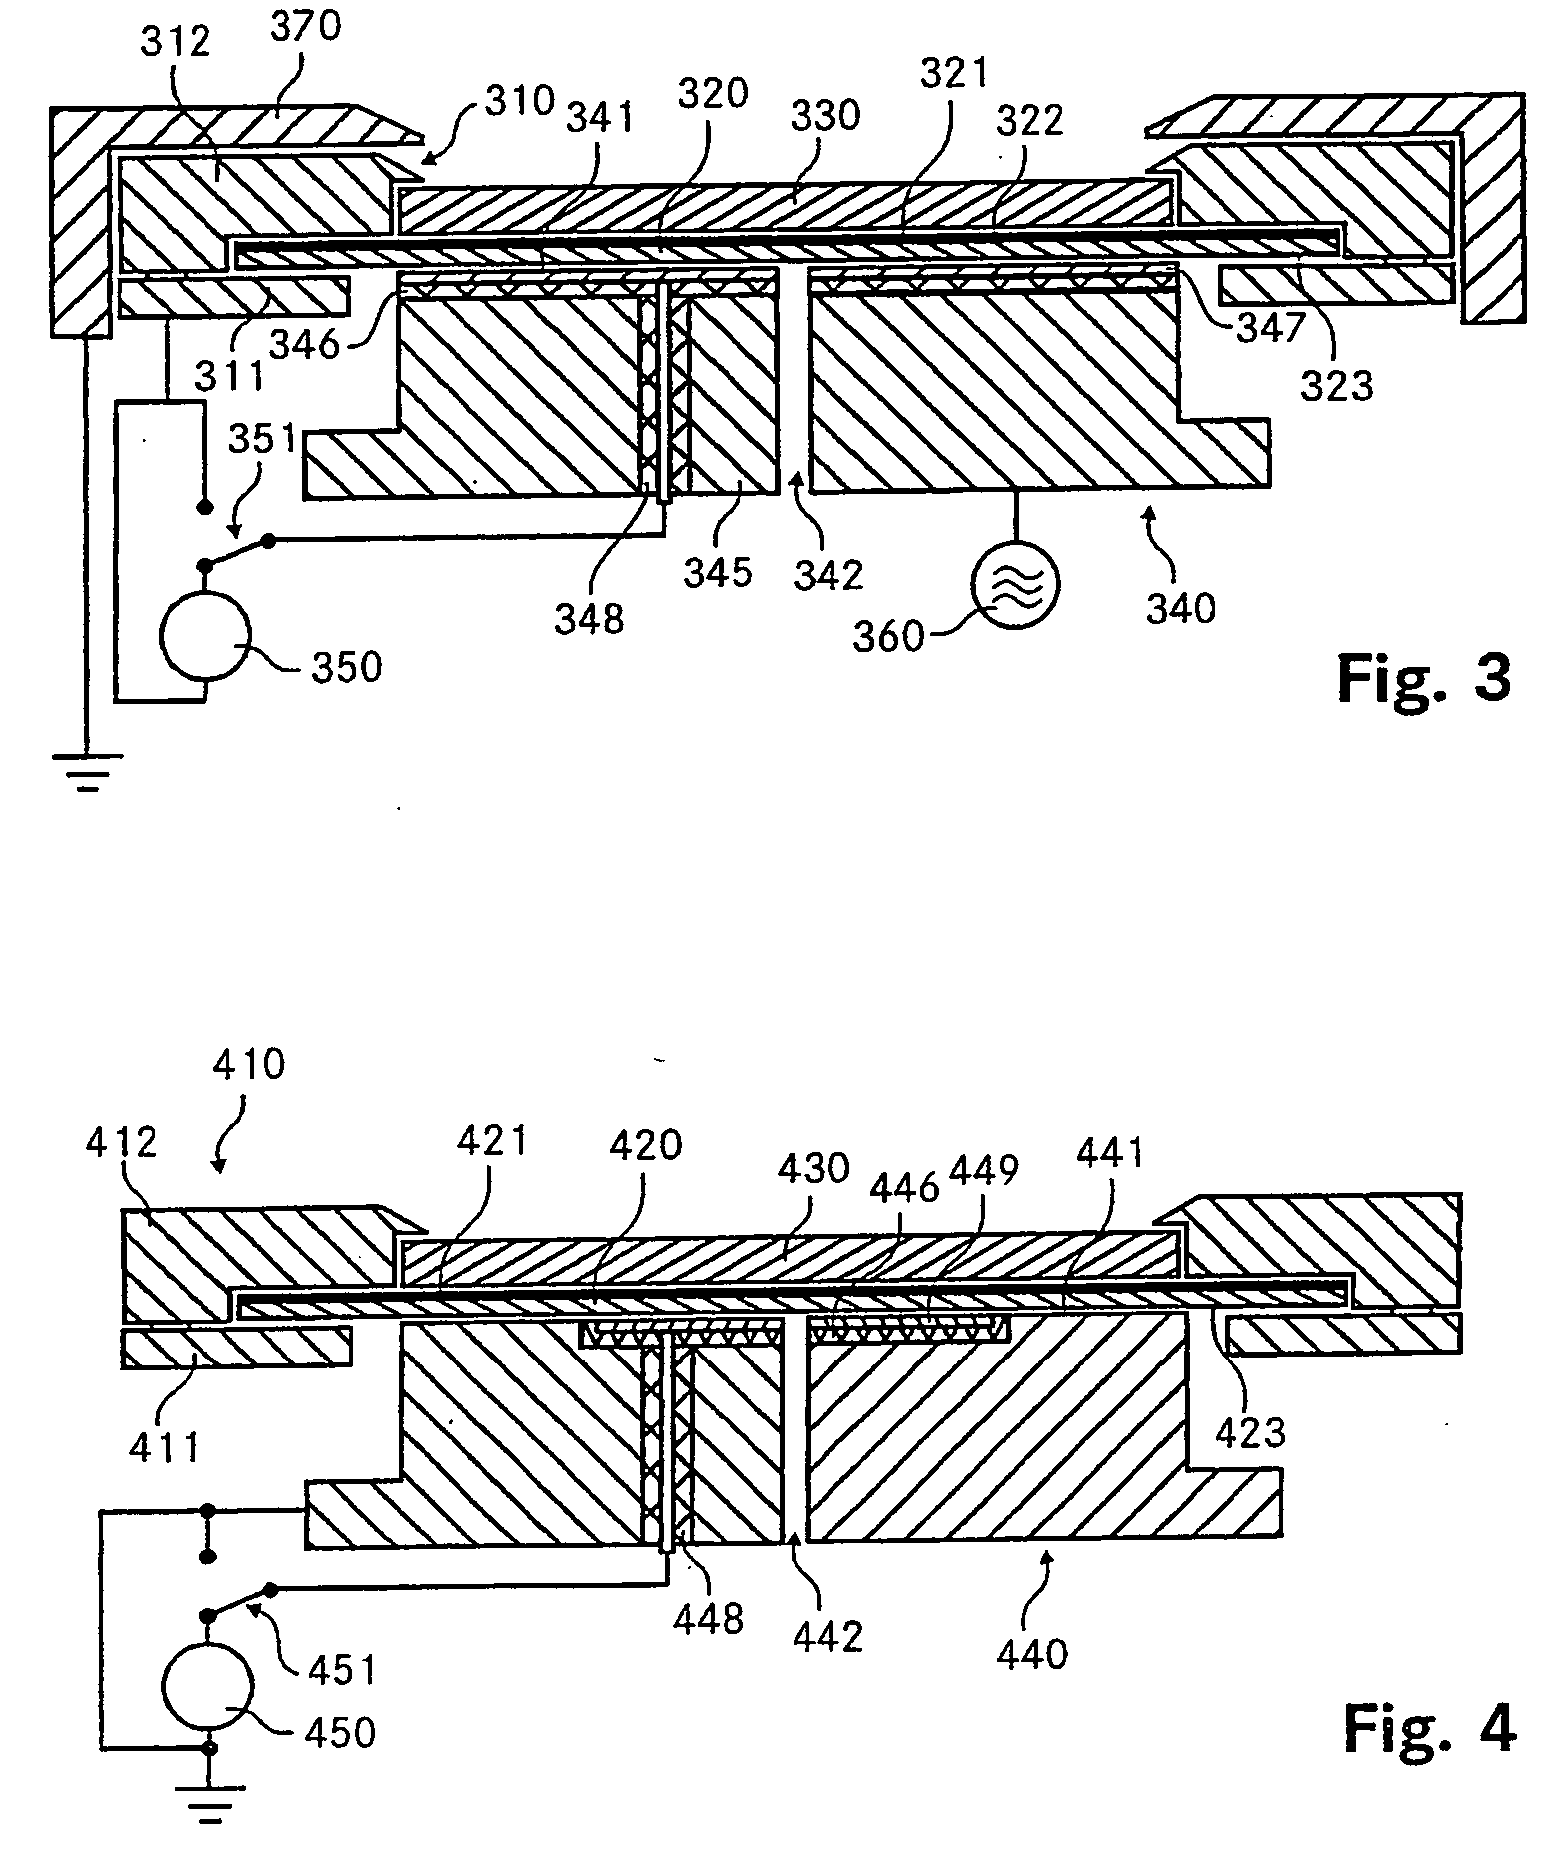 Installation for processing a substrate